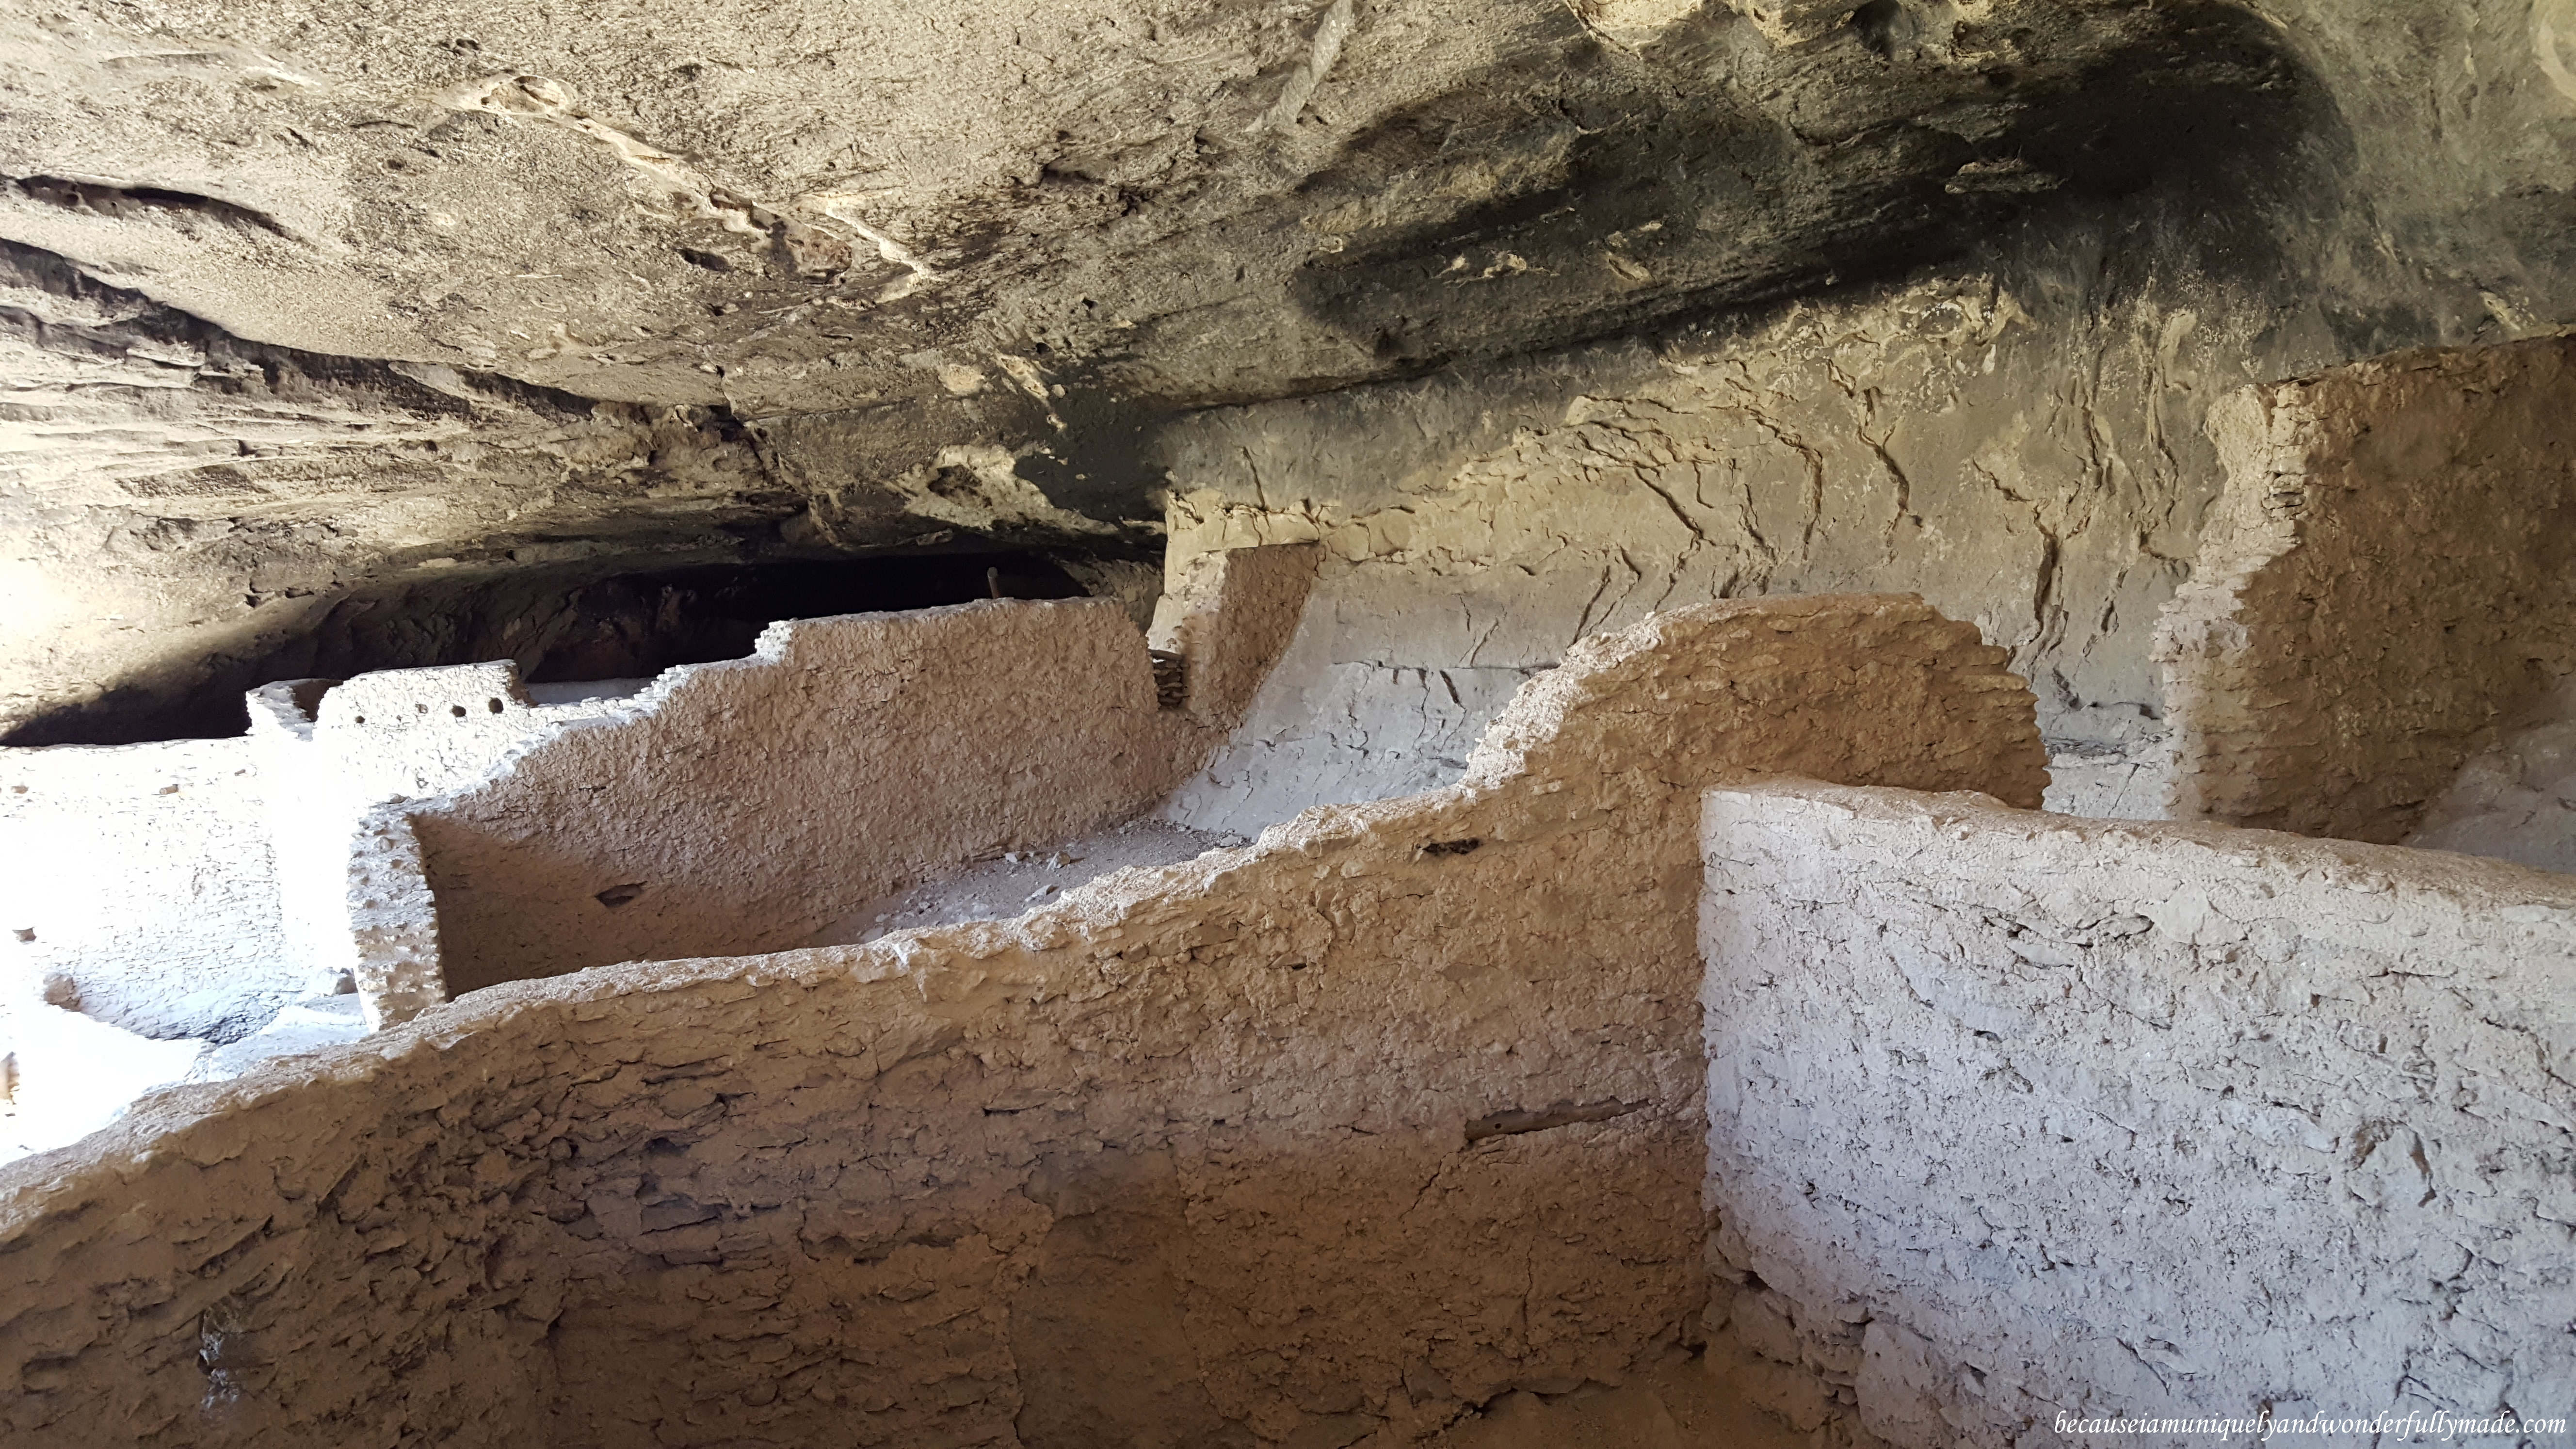 Archaeologists have identified 46 rooms at Gila Cliff Dwellings National Monument.